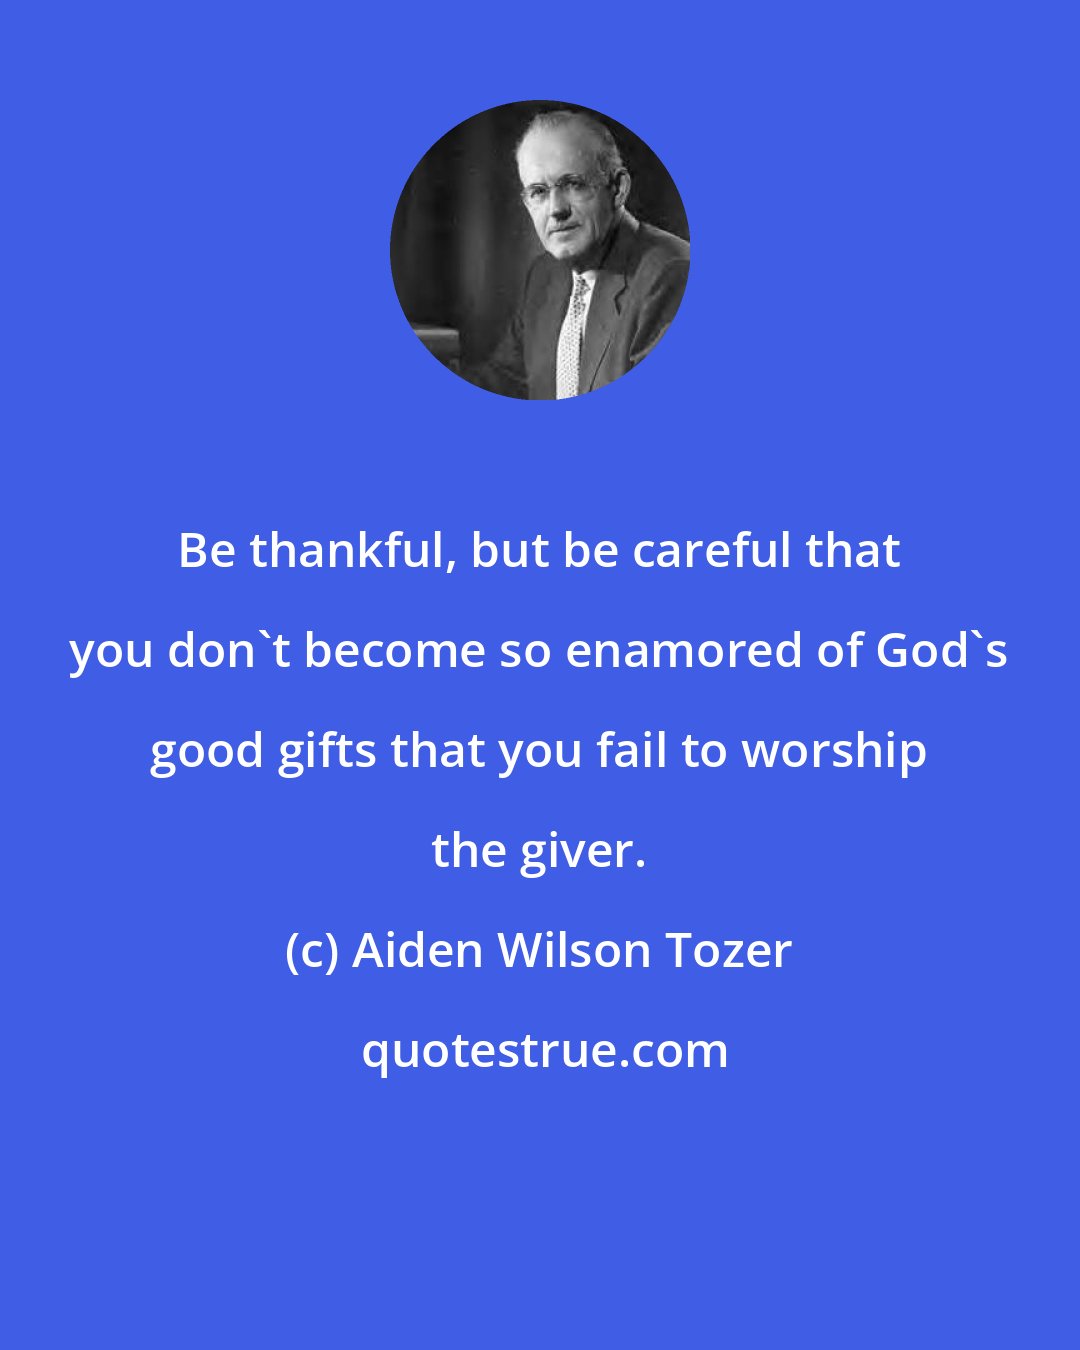 Aiden Wilson Tozer: Be thankful, but be careful that you don't become so enamored of God's good gifts that you fail to worship the giver.